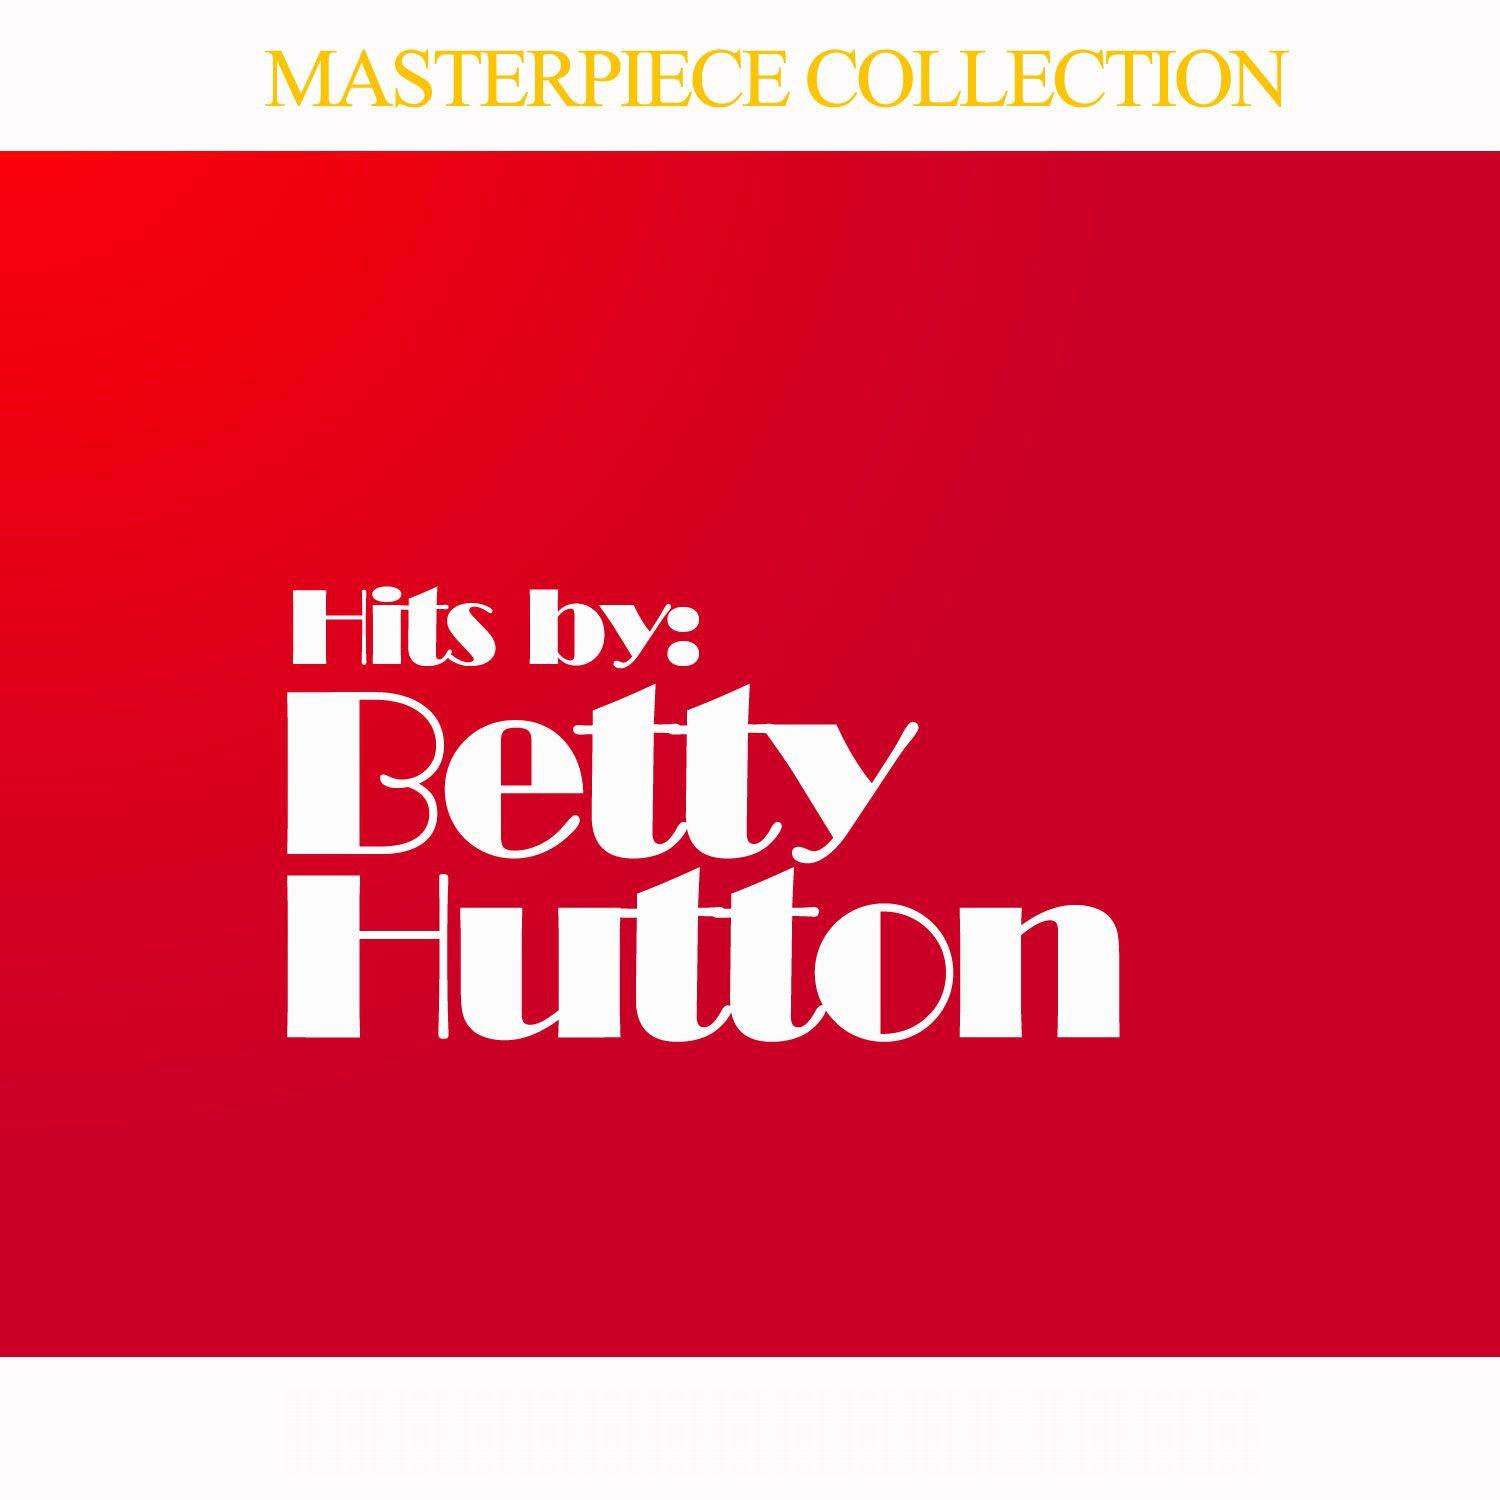 Masterpiece Collection of Betty Hutton